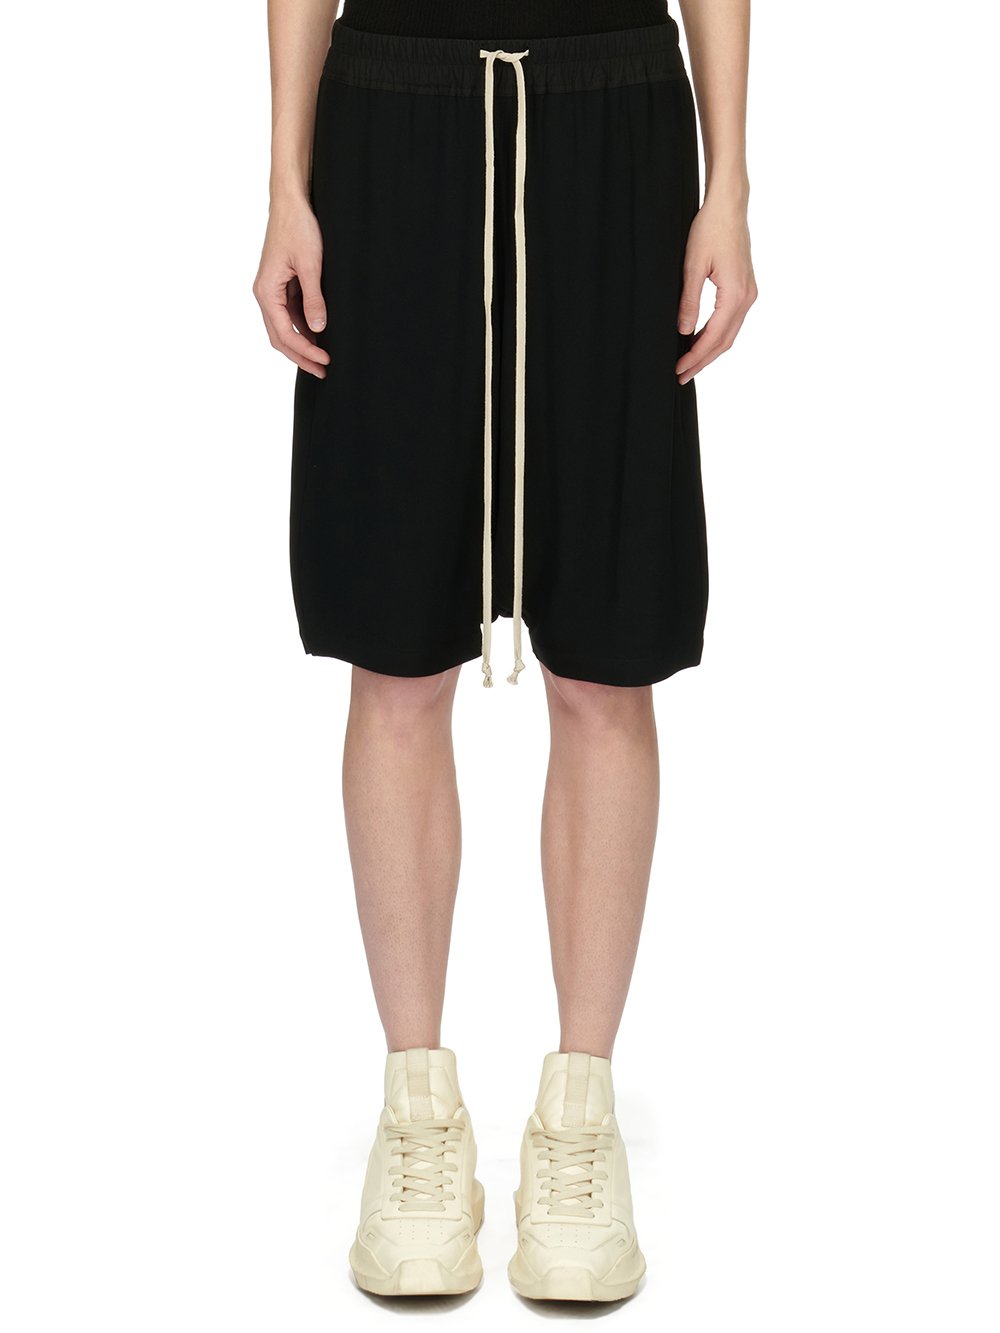 RICK OWENS FOREVER PODS SHORTS IN BLACK CADY CREPE. 